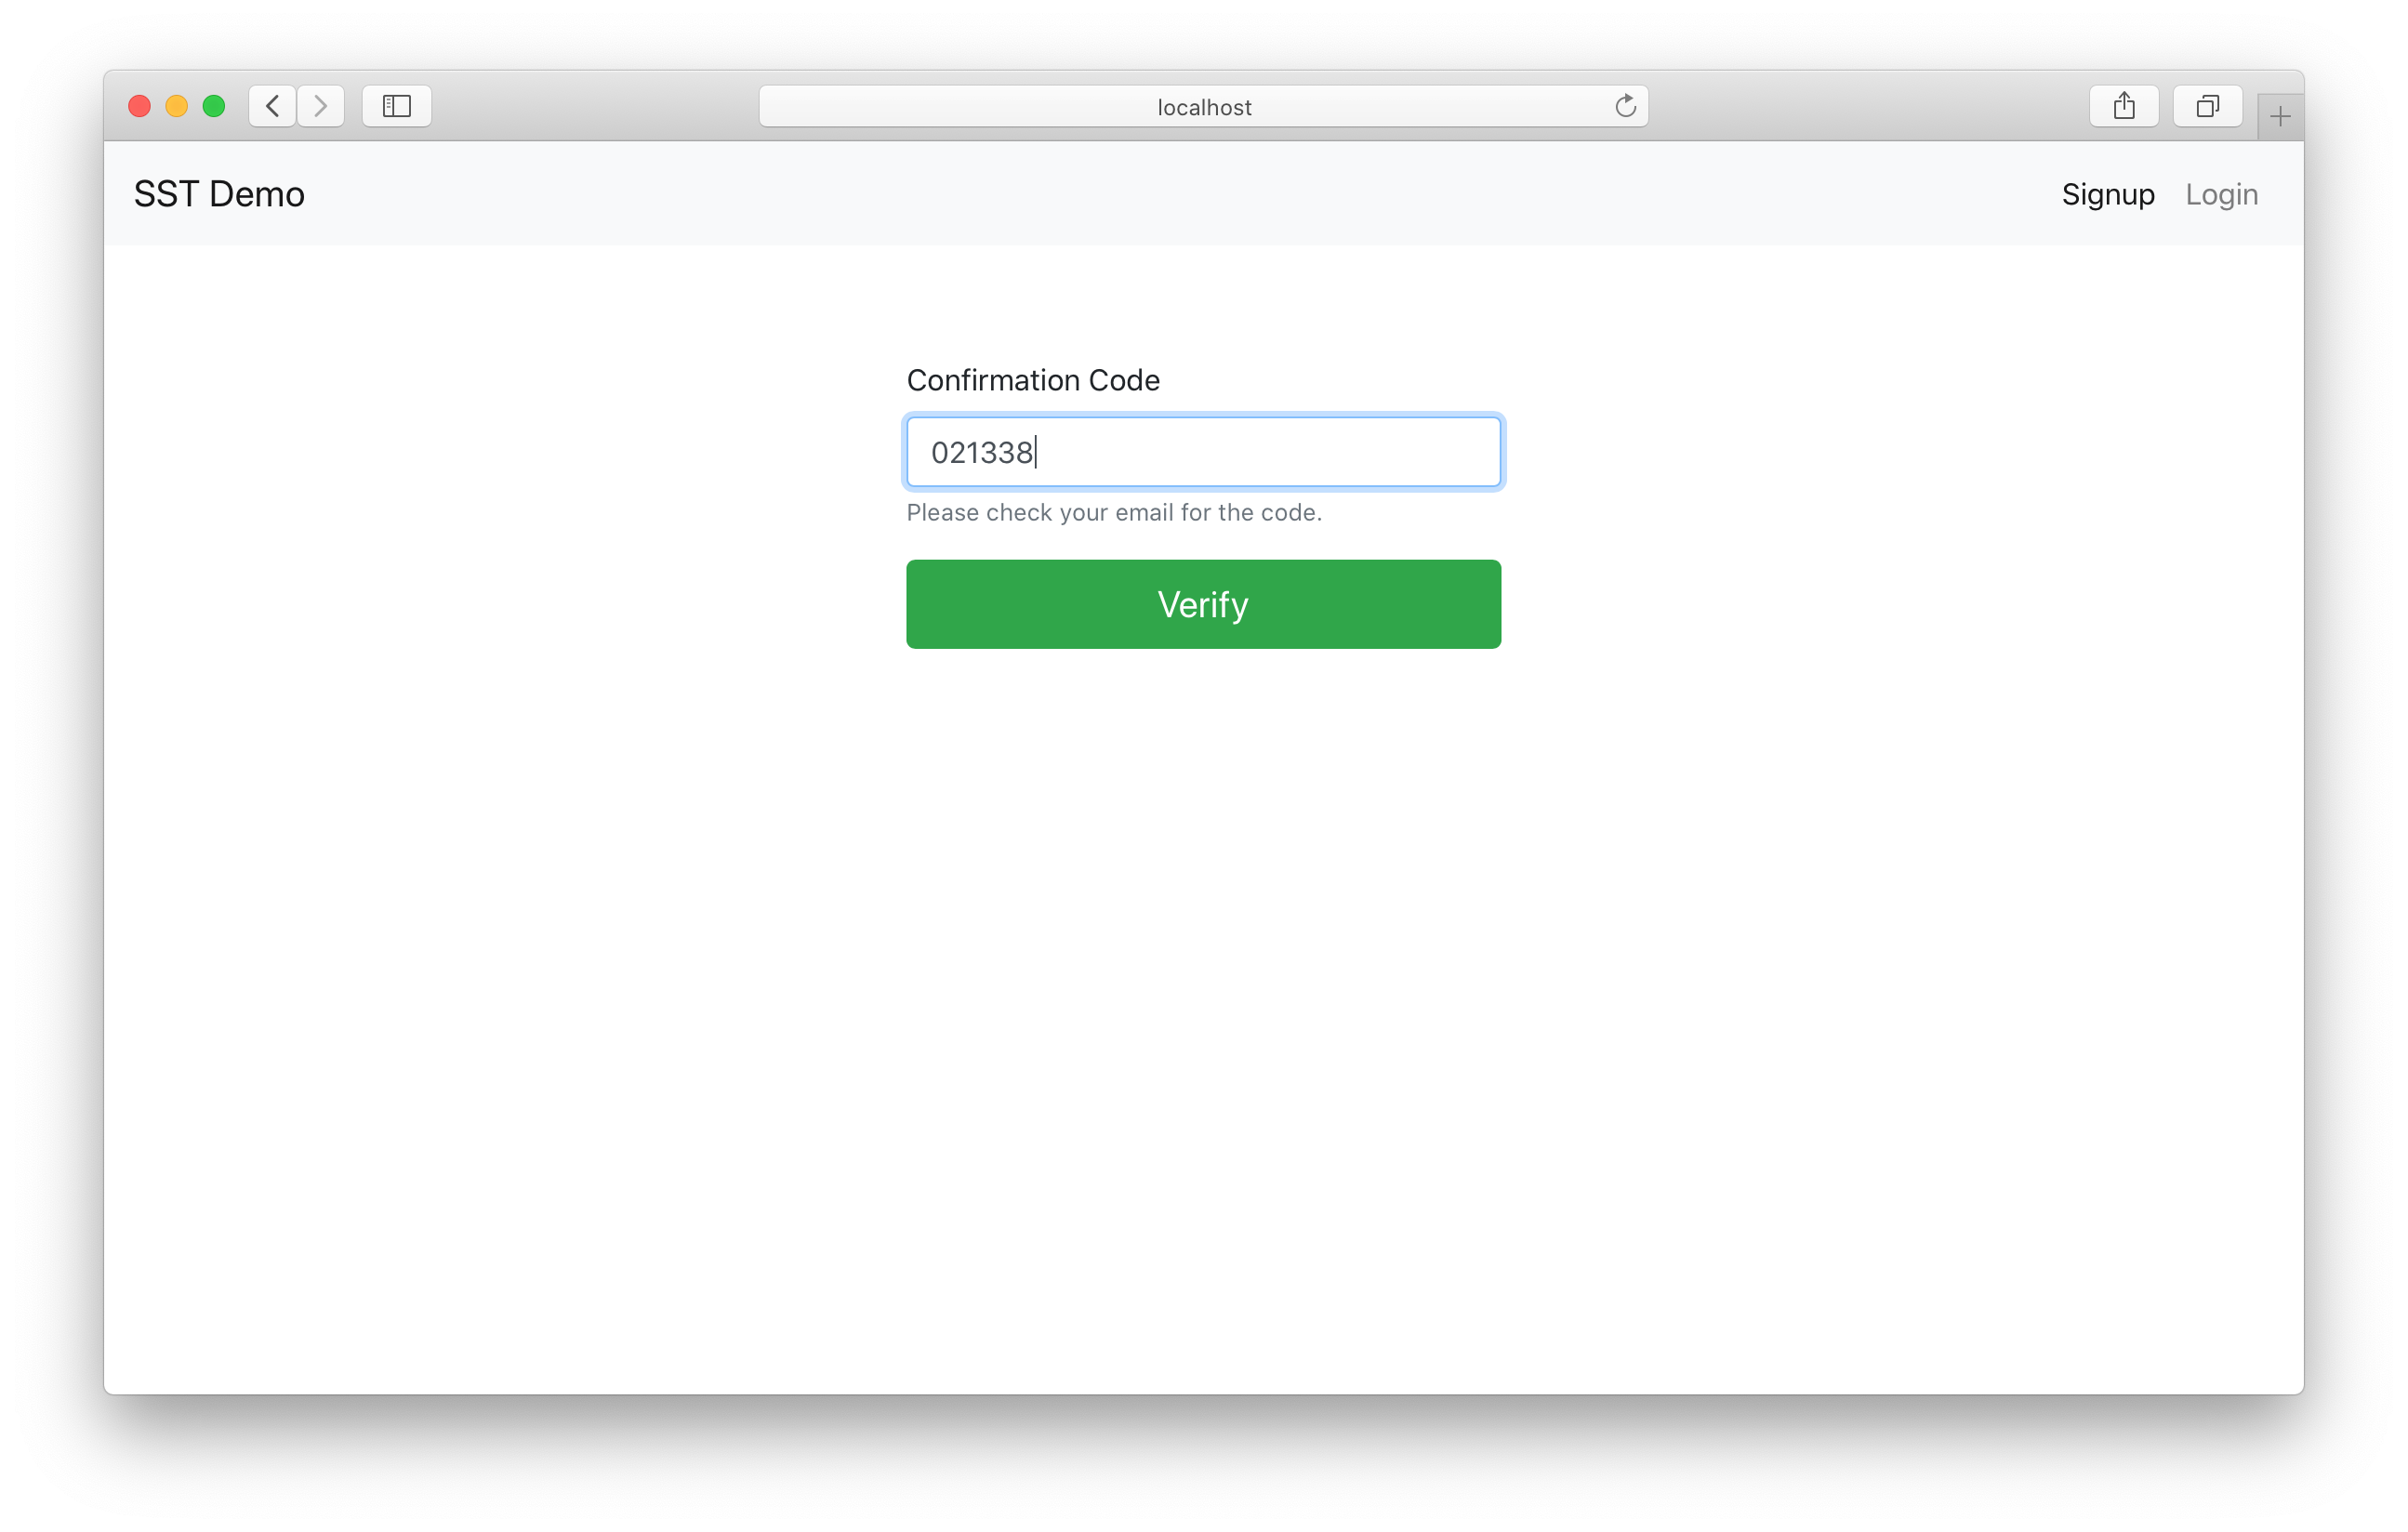 Sign up confirm Cognito in React.js app